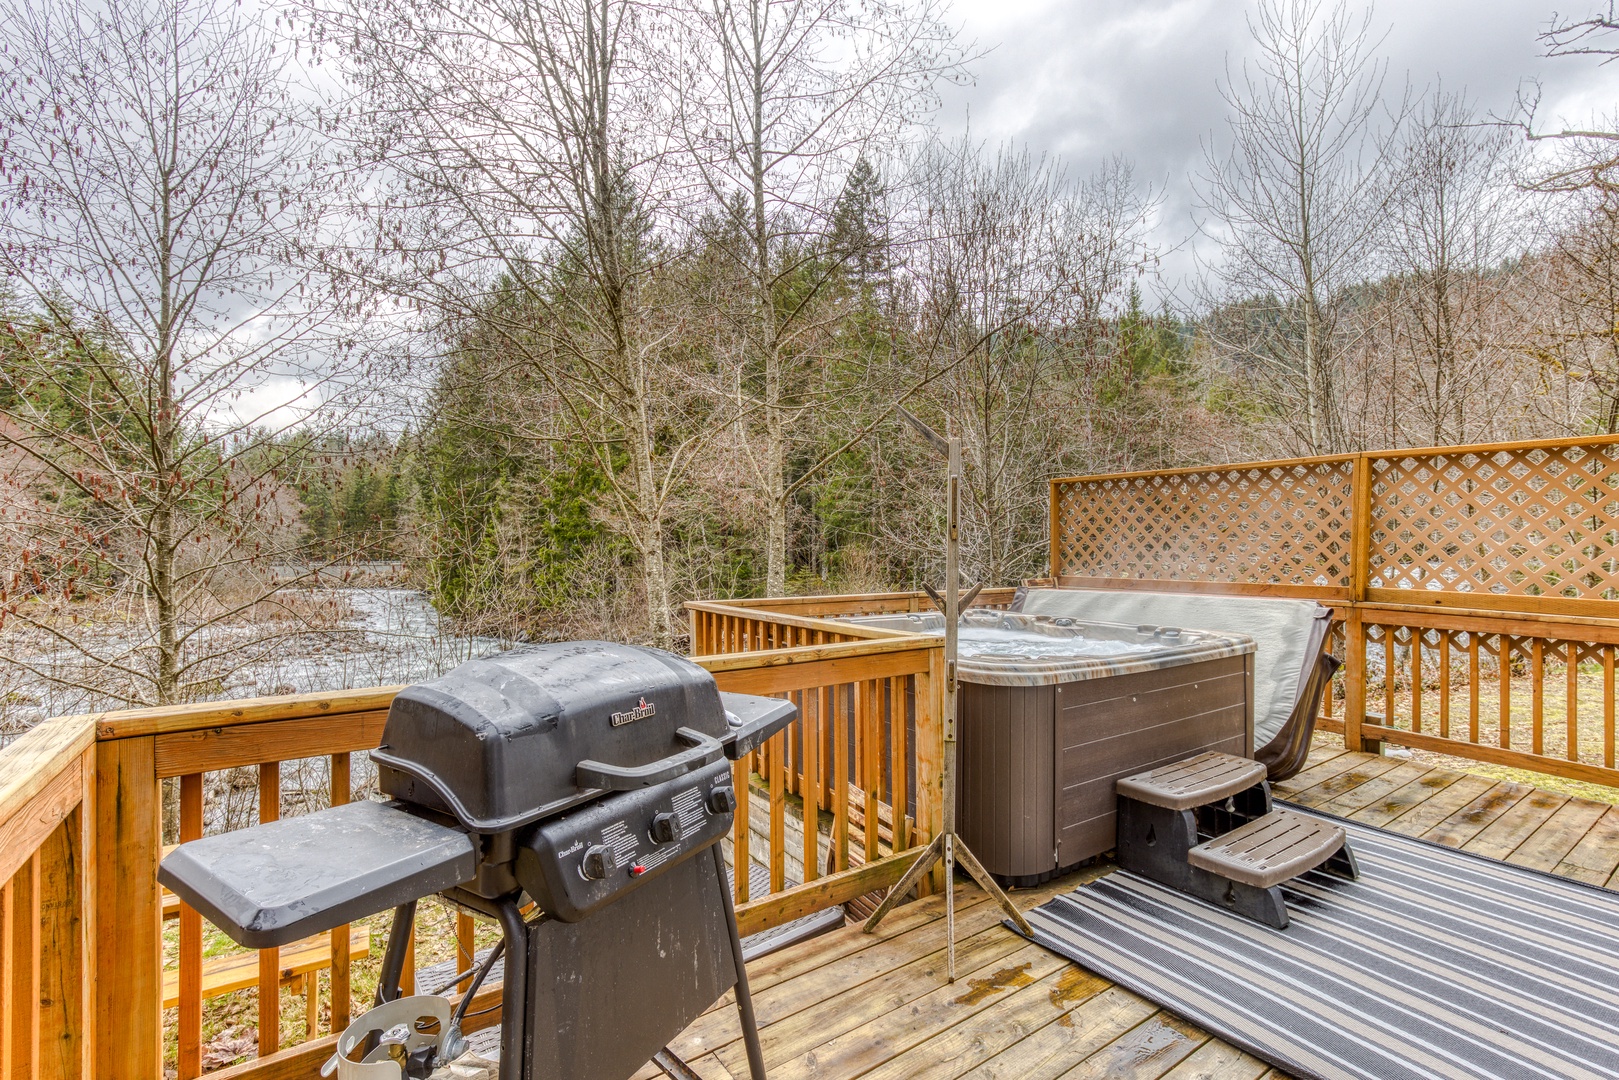 Rhododendron Vacation Rentals, Riverbend Cabin #2 - Hot tub and grill right on the back deck